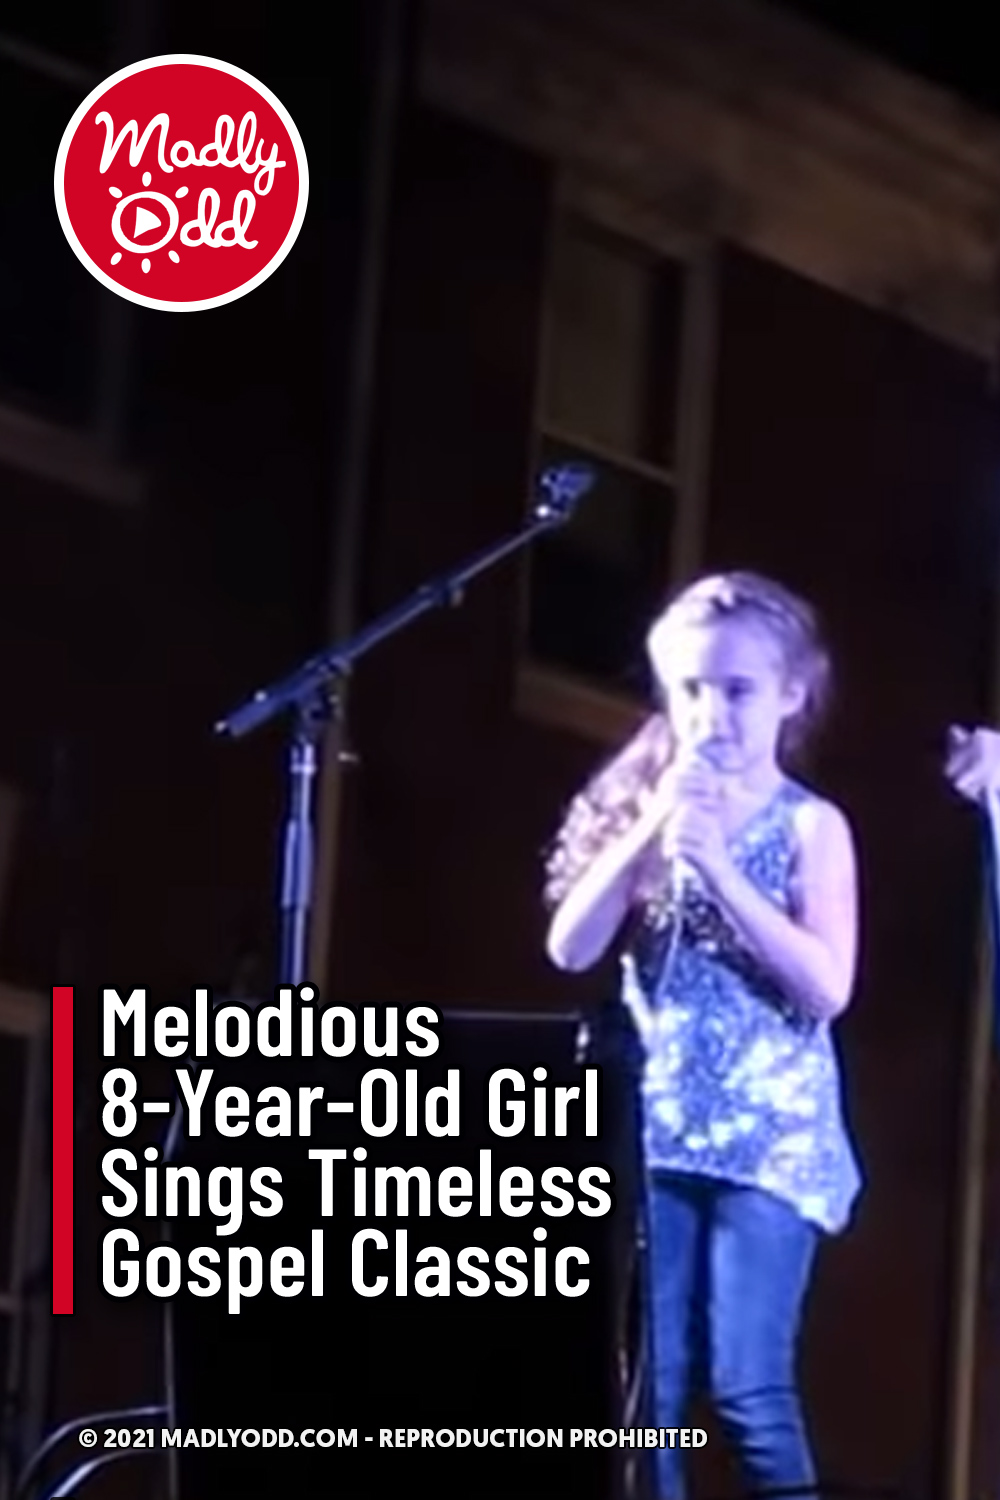 Melodious 8-Year-Old Girl Sings Timeless Gospel Classic